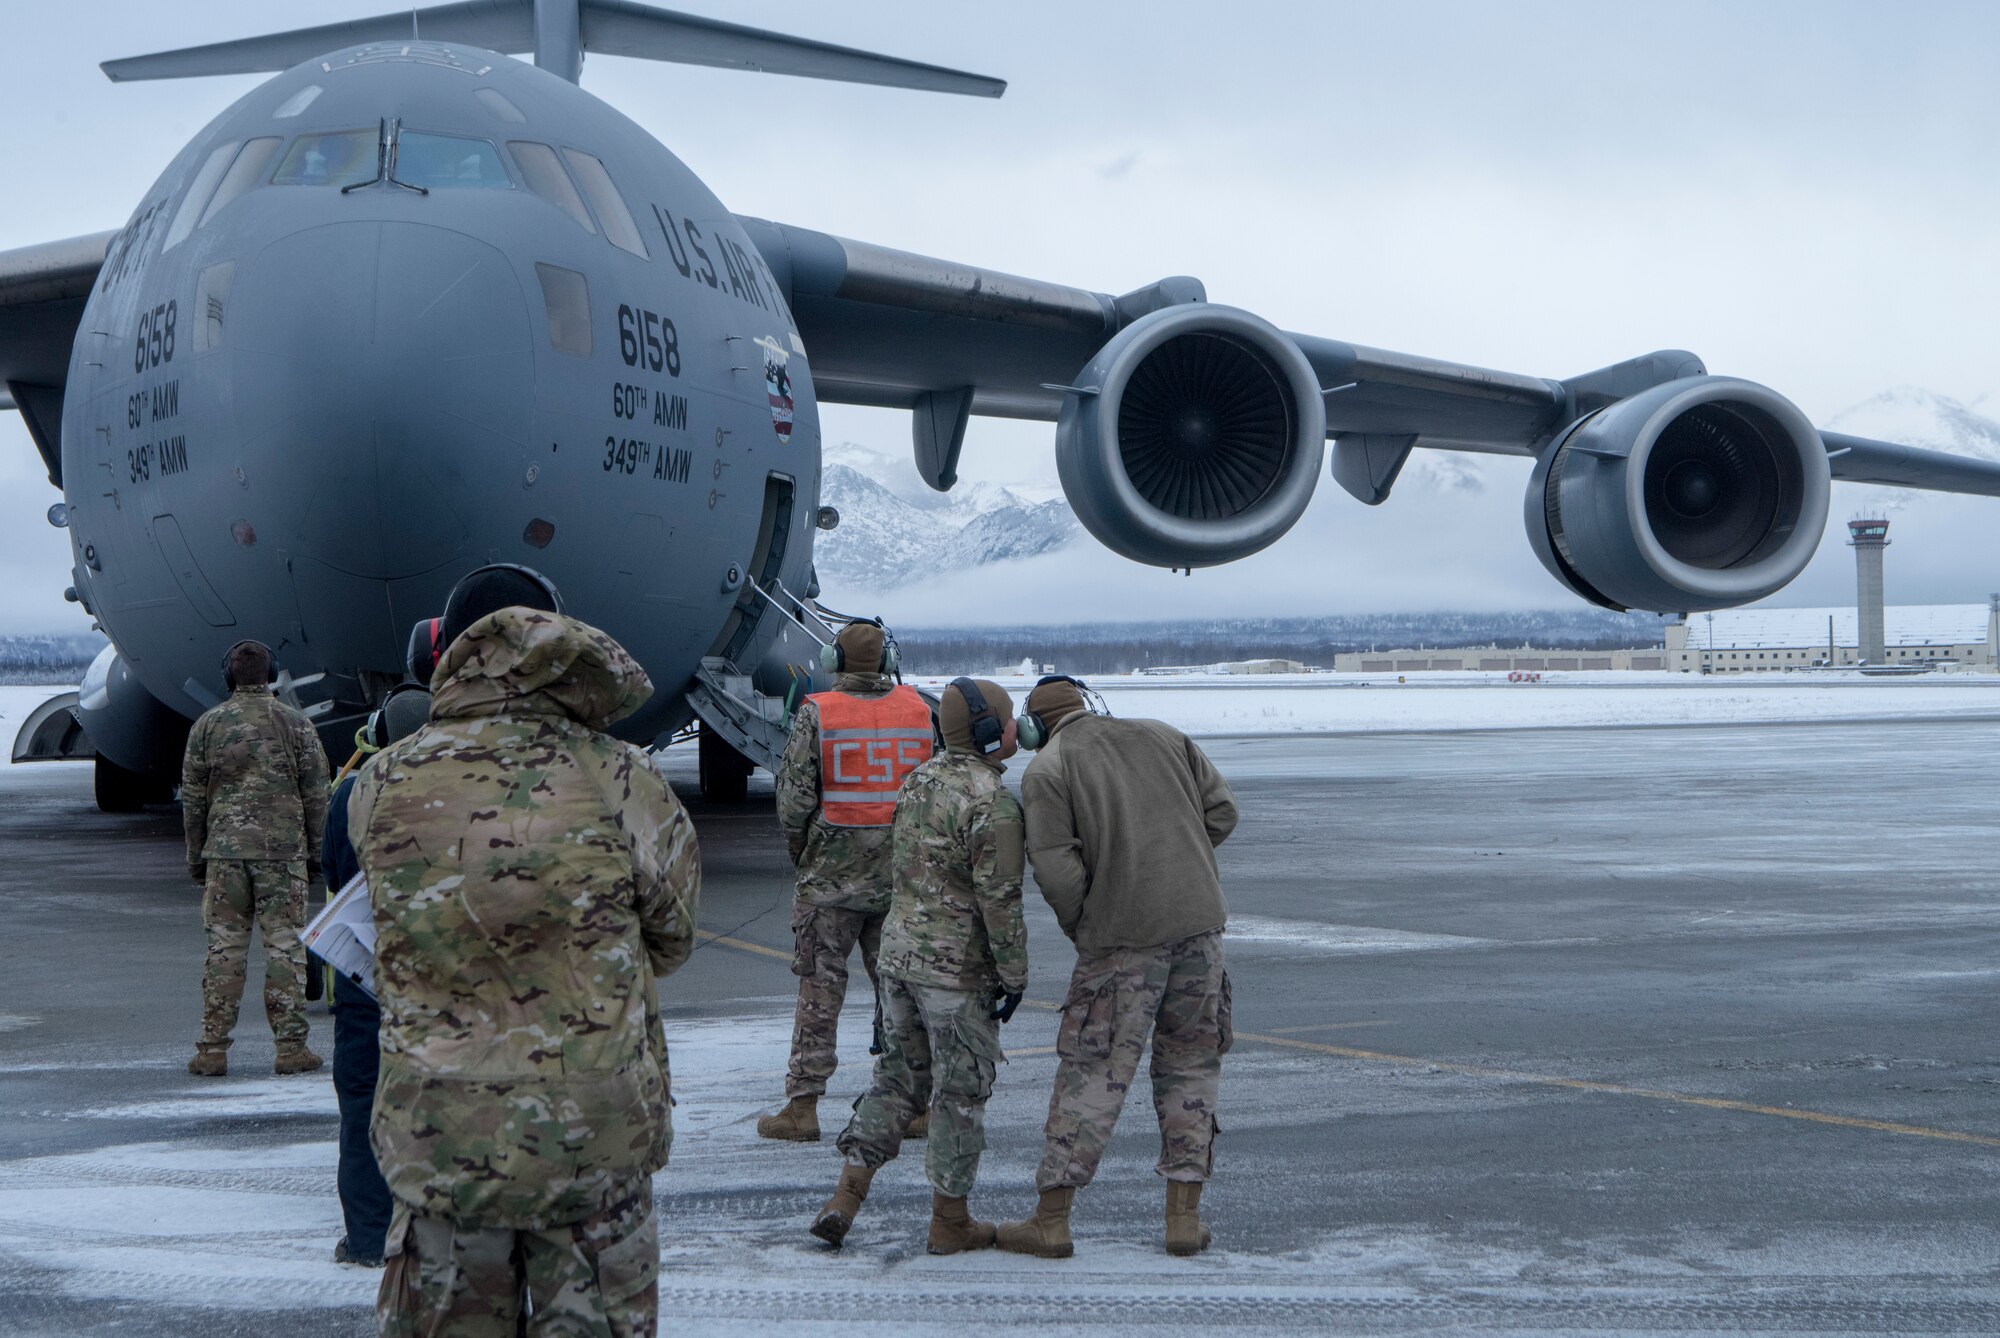 Airmen from Travis Air Force Base, Calif., and Joint Base Elmendorf-Richardson, get ready for cold weather aircraft maintenance procedures training at JBER, Alaska, Nov. 19, 2019. The training prepared Airmen to operate in arctic environments.